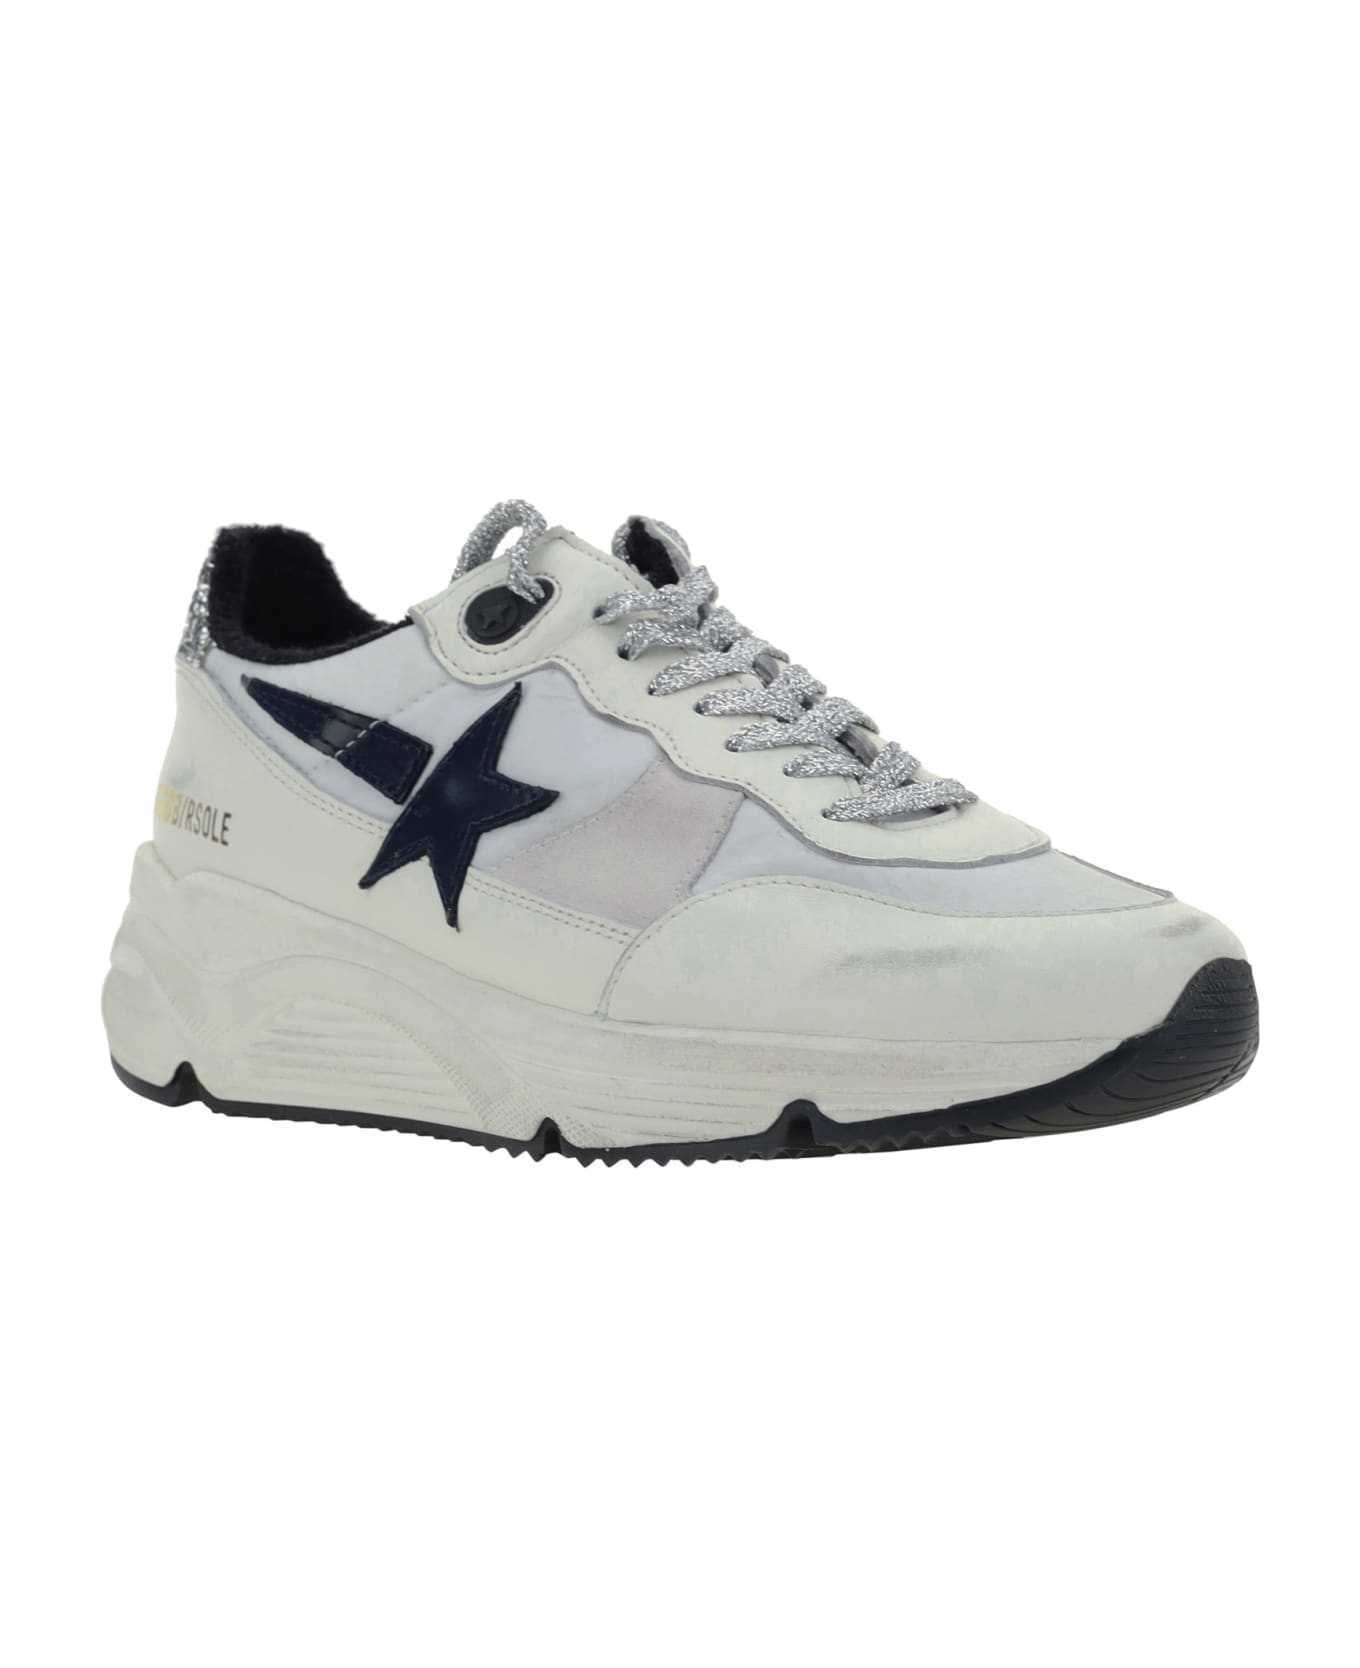 Golden Goose Running Sole Sneakers - Optic White/white/black/silver